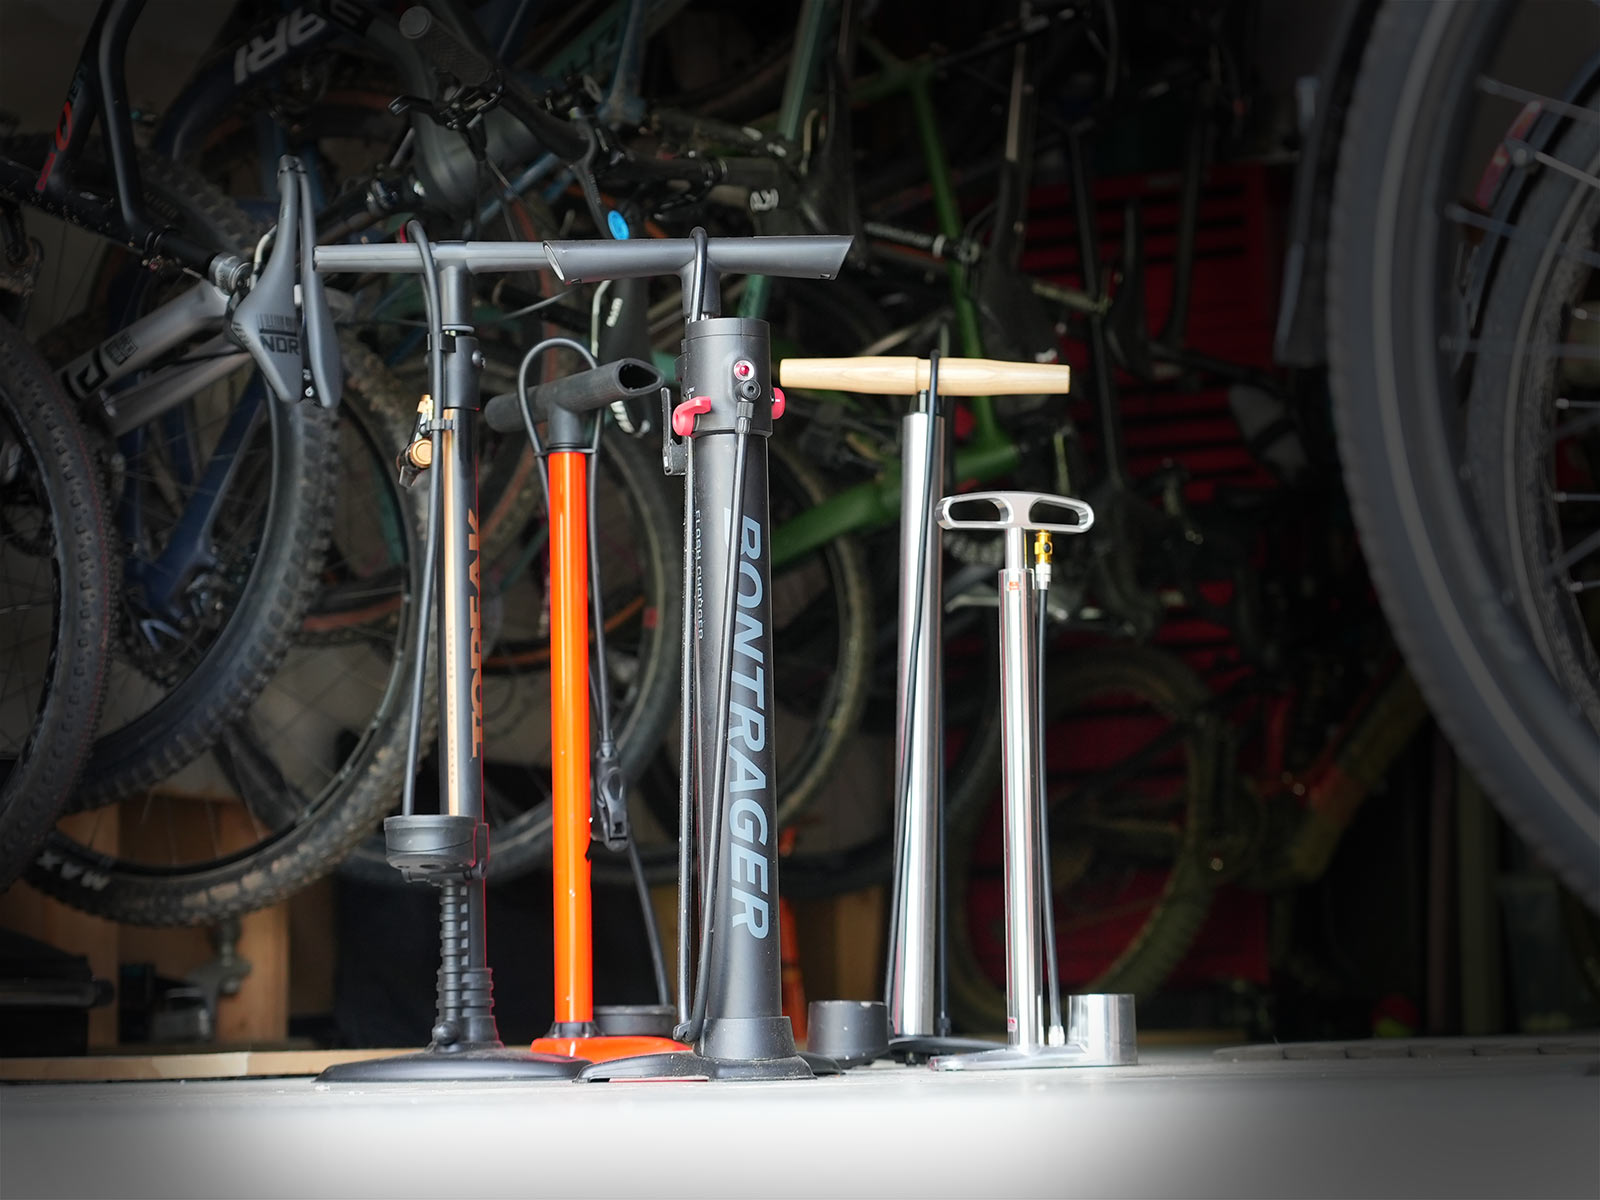 Best Bike Pumps - Heres the right floor pump for every type of bicycle